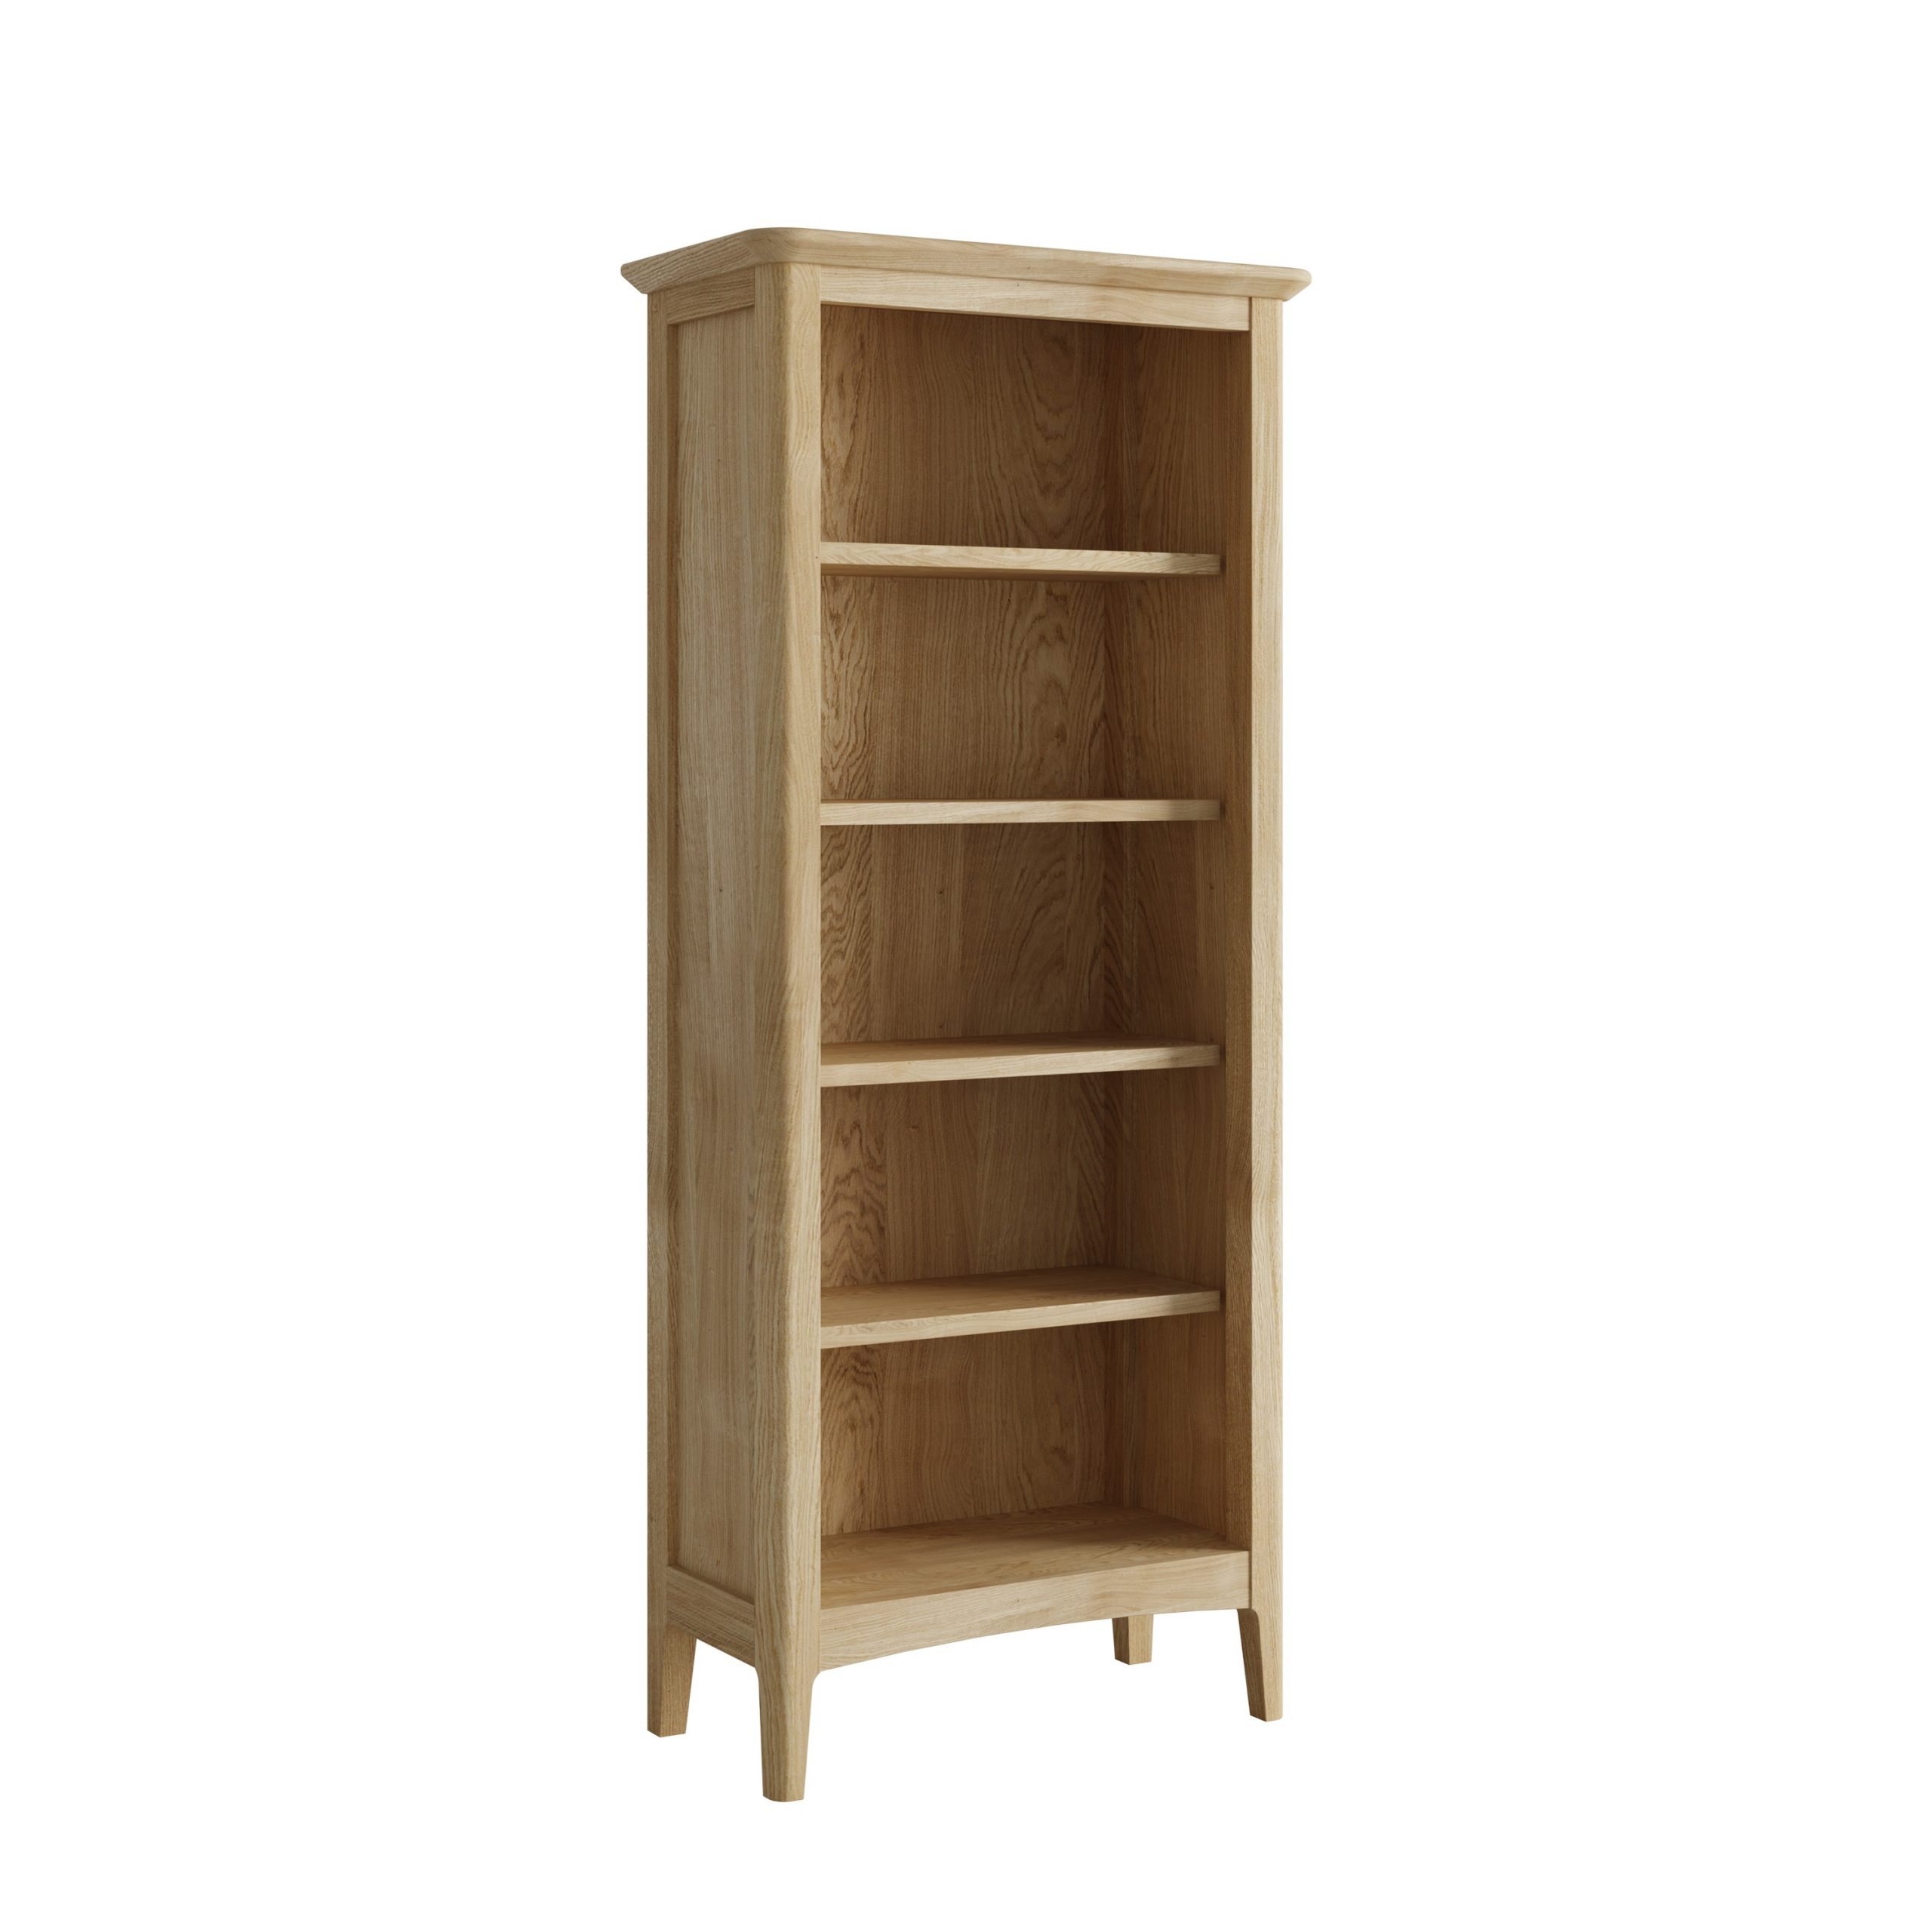 Oak Media Storage or Bookcase - Our Price - Only £325